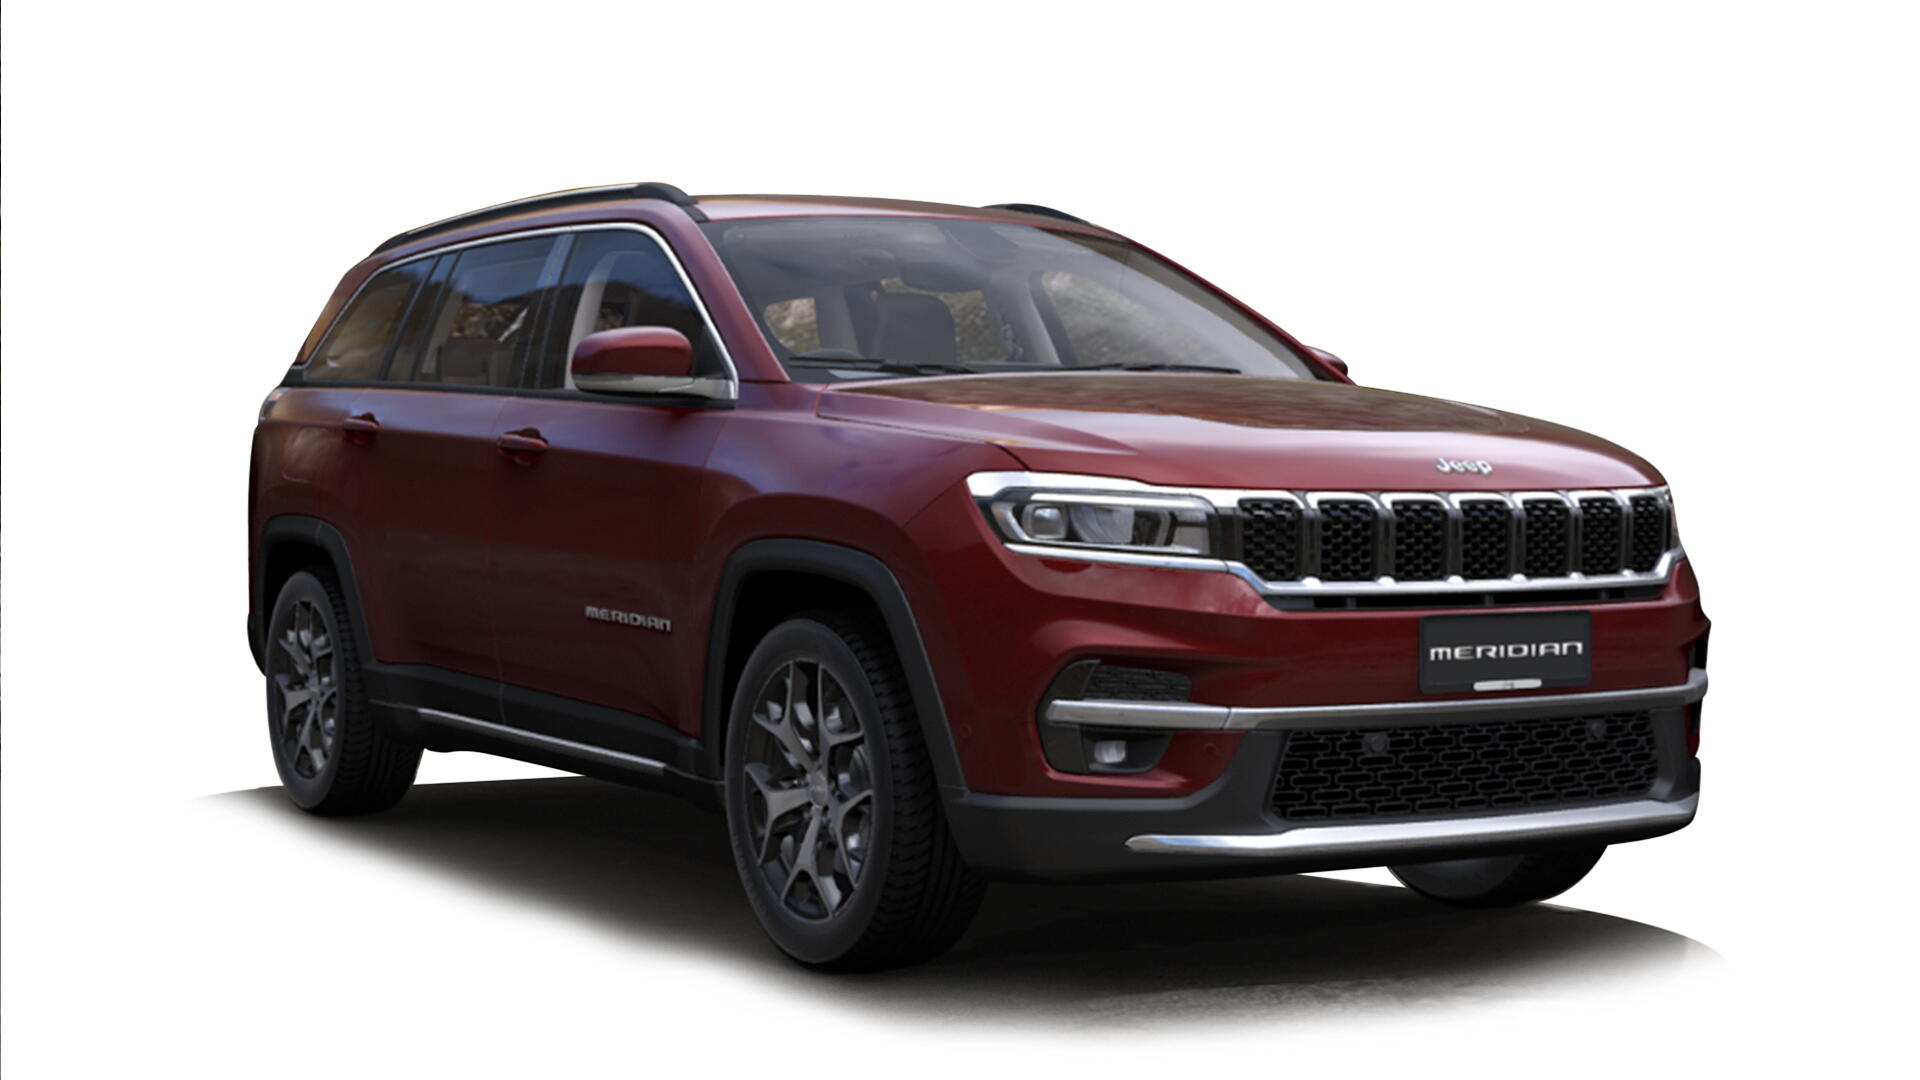 Jeep Meridian Images